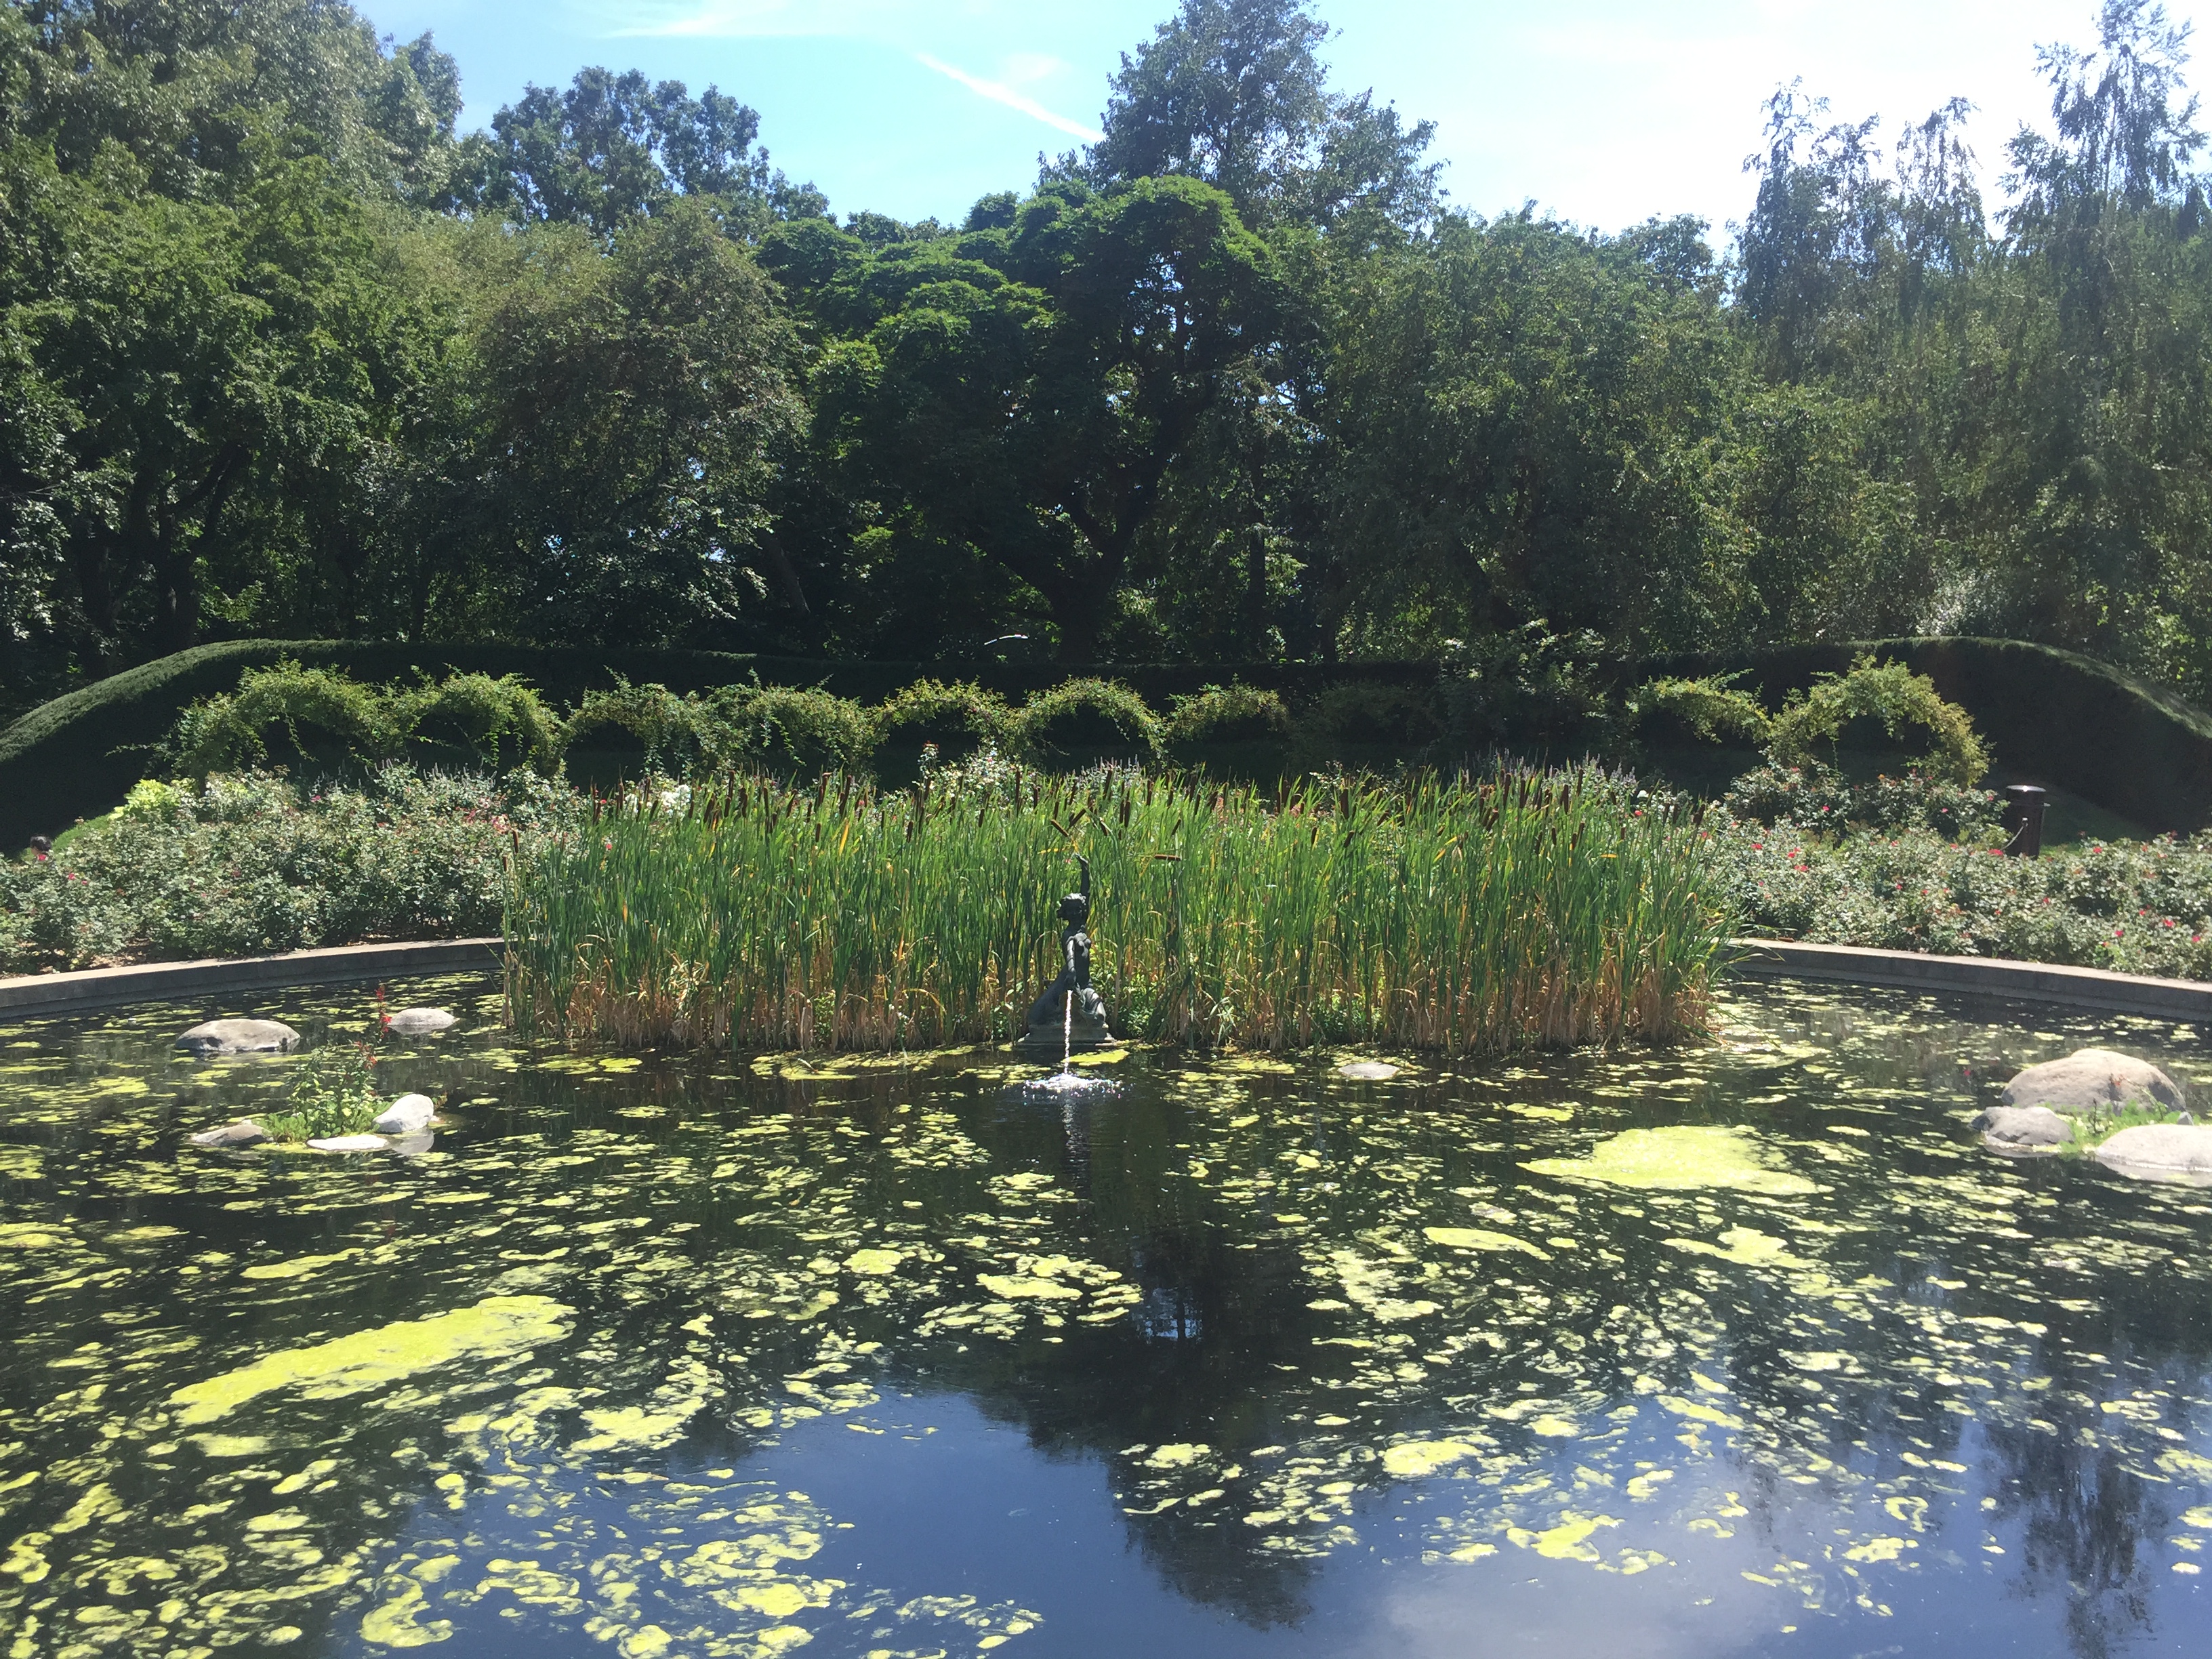 New York City isn't all concrete jungle. Check out the Brooklyn Botanic Gardens for a day of nature.